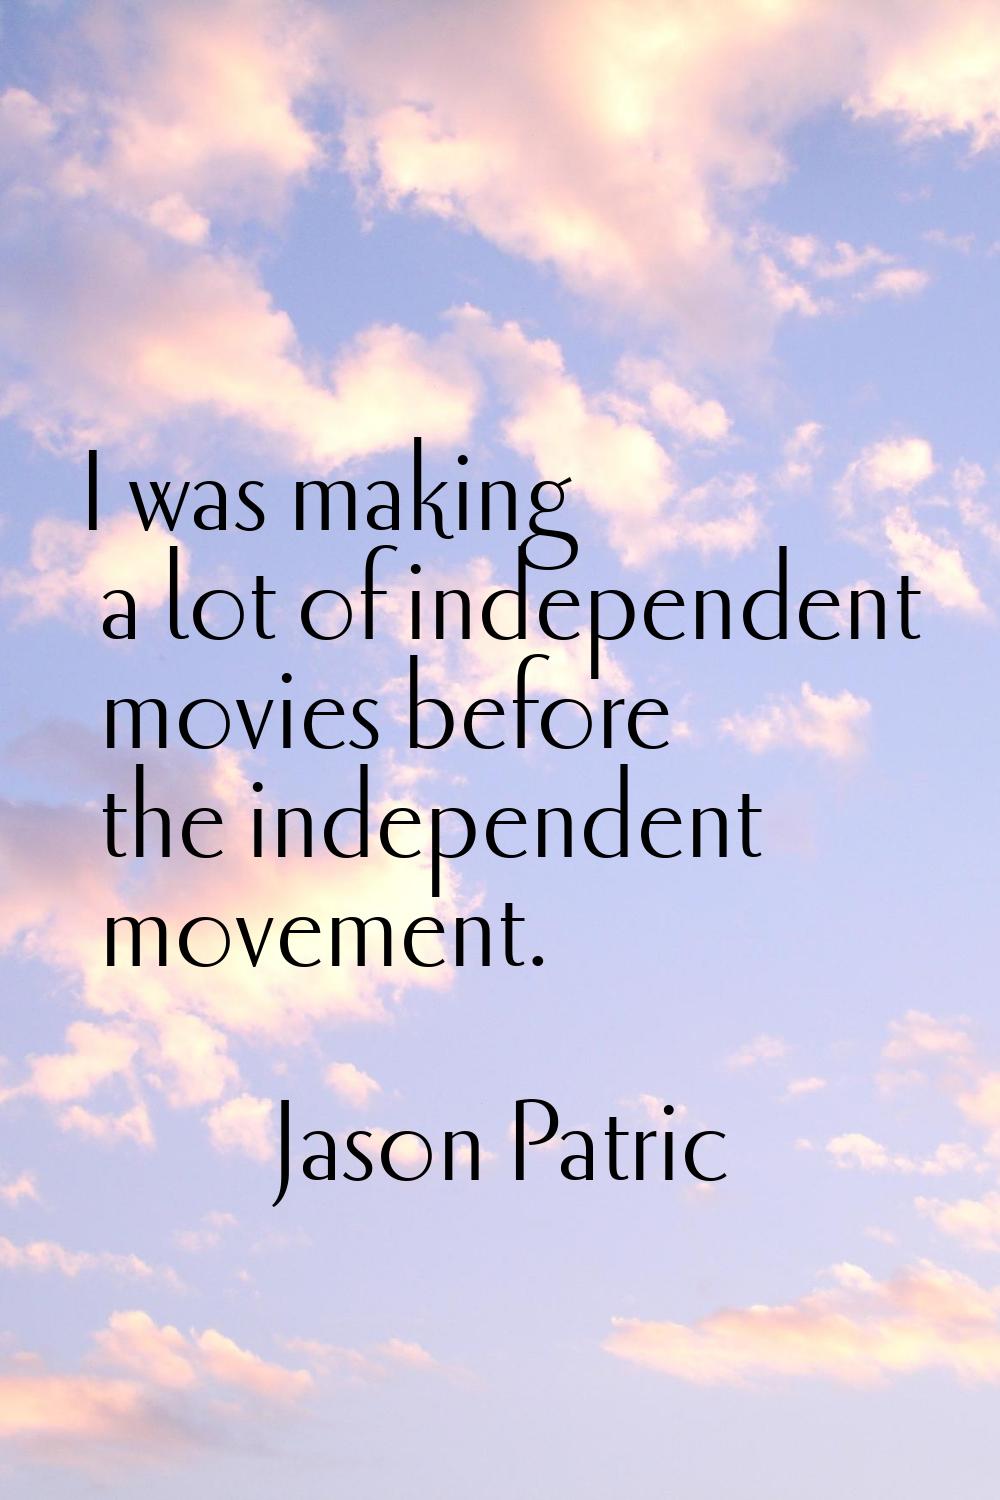 I was making a lot of independent movies before the independent movement.